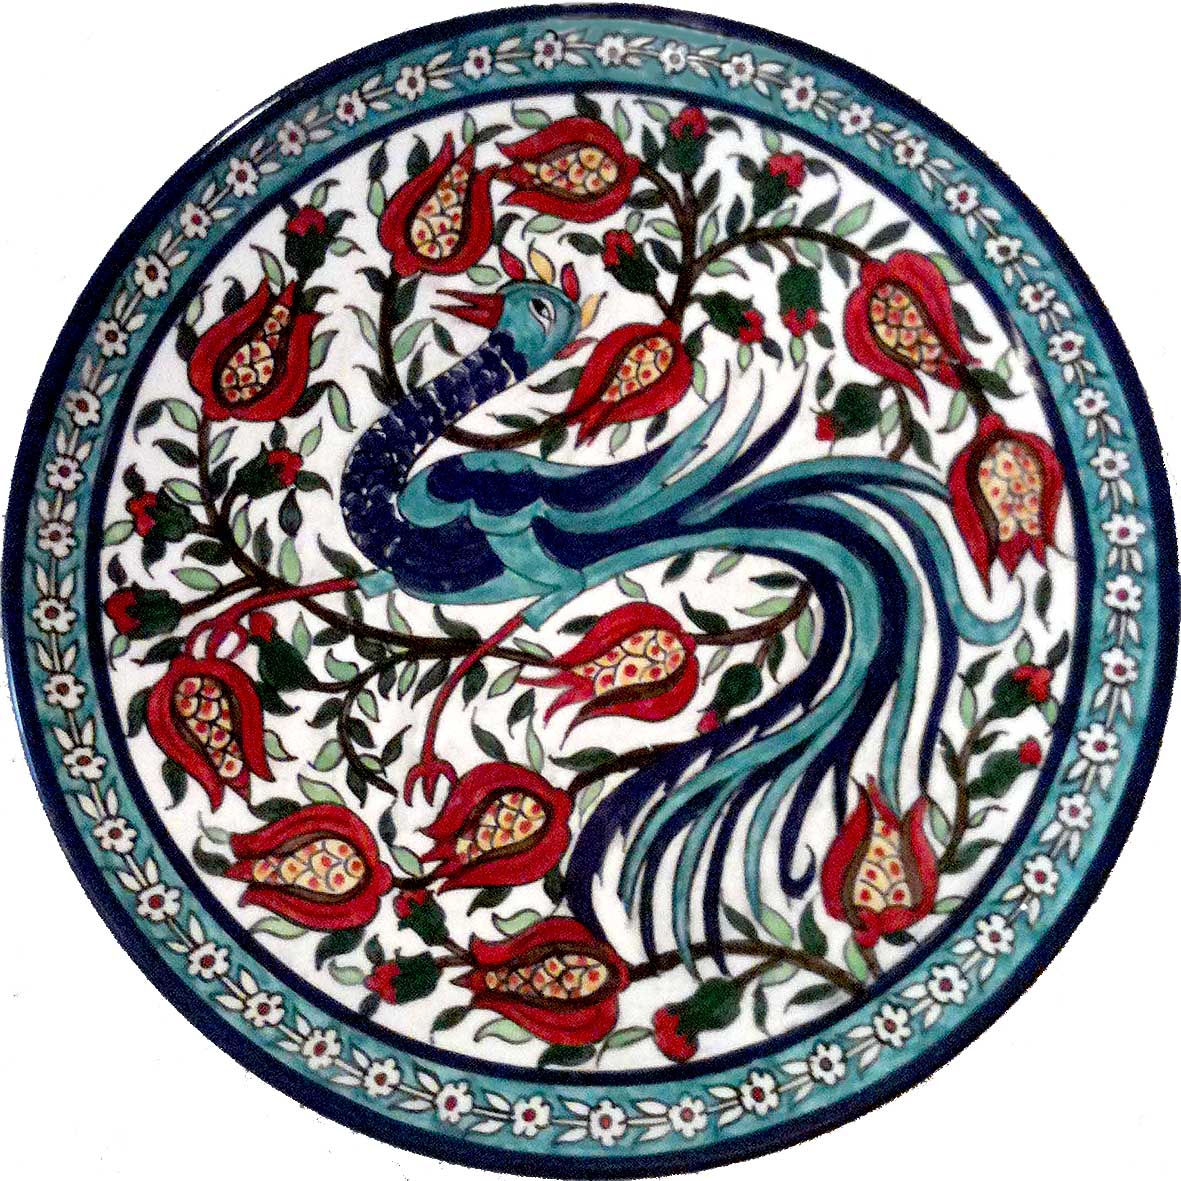 The Peacock in a Pomegranate Garden Hand Painted Plate